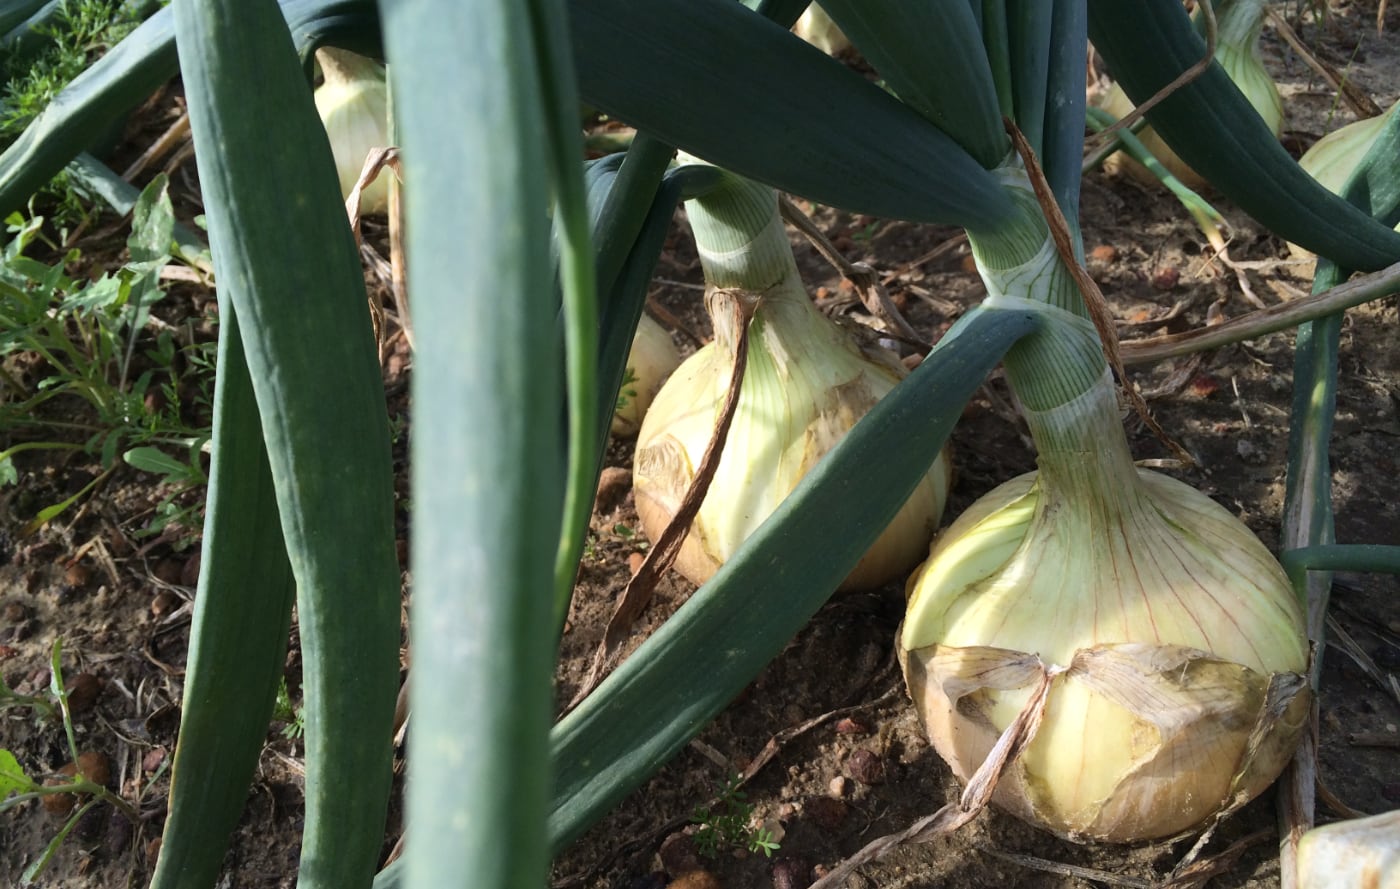 Vidalia Onions before they're harvested